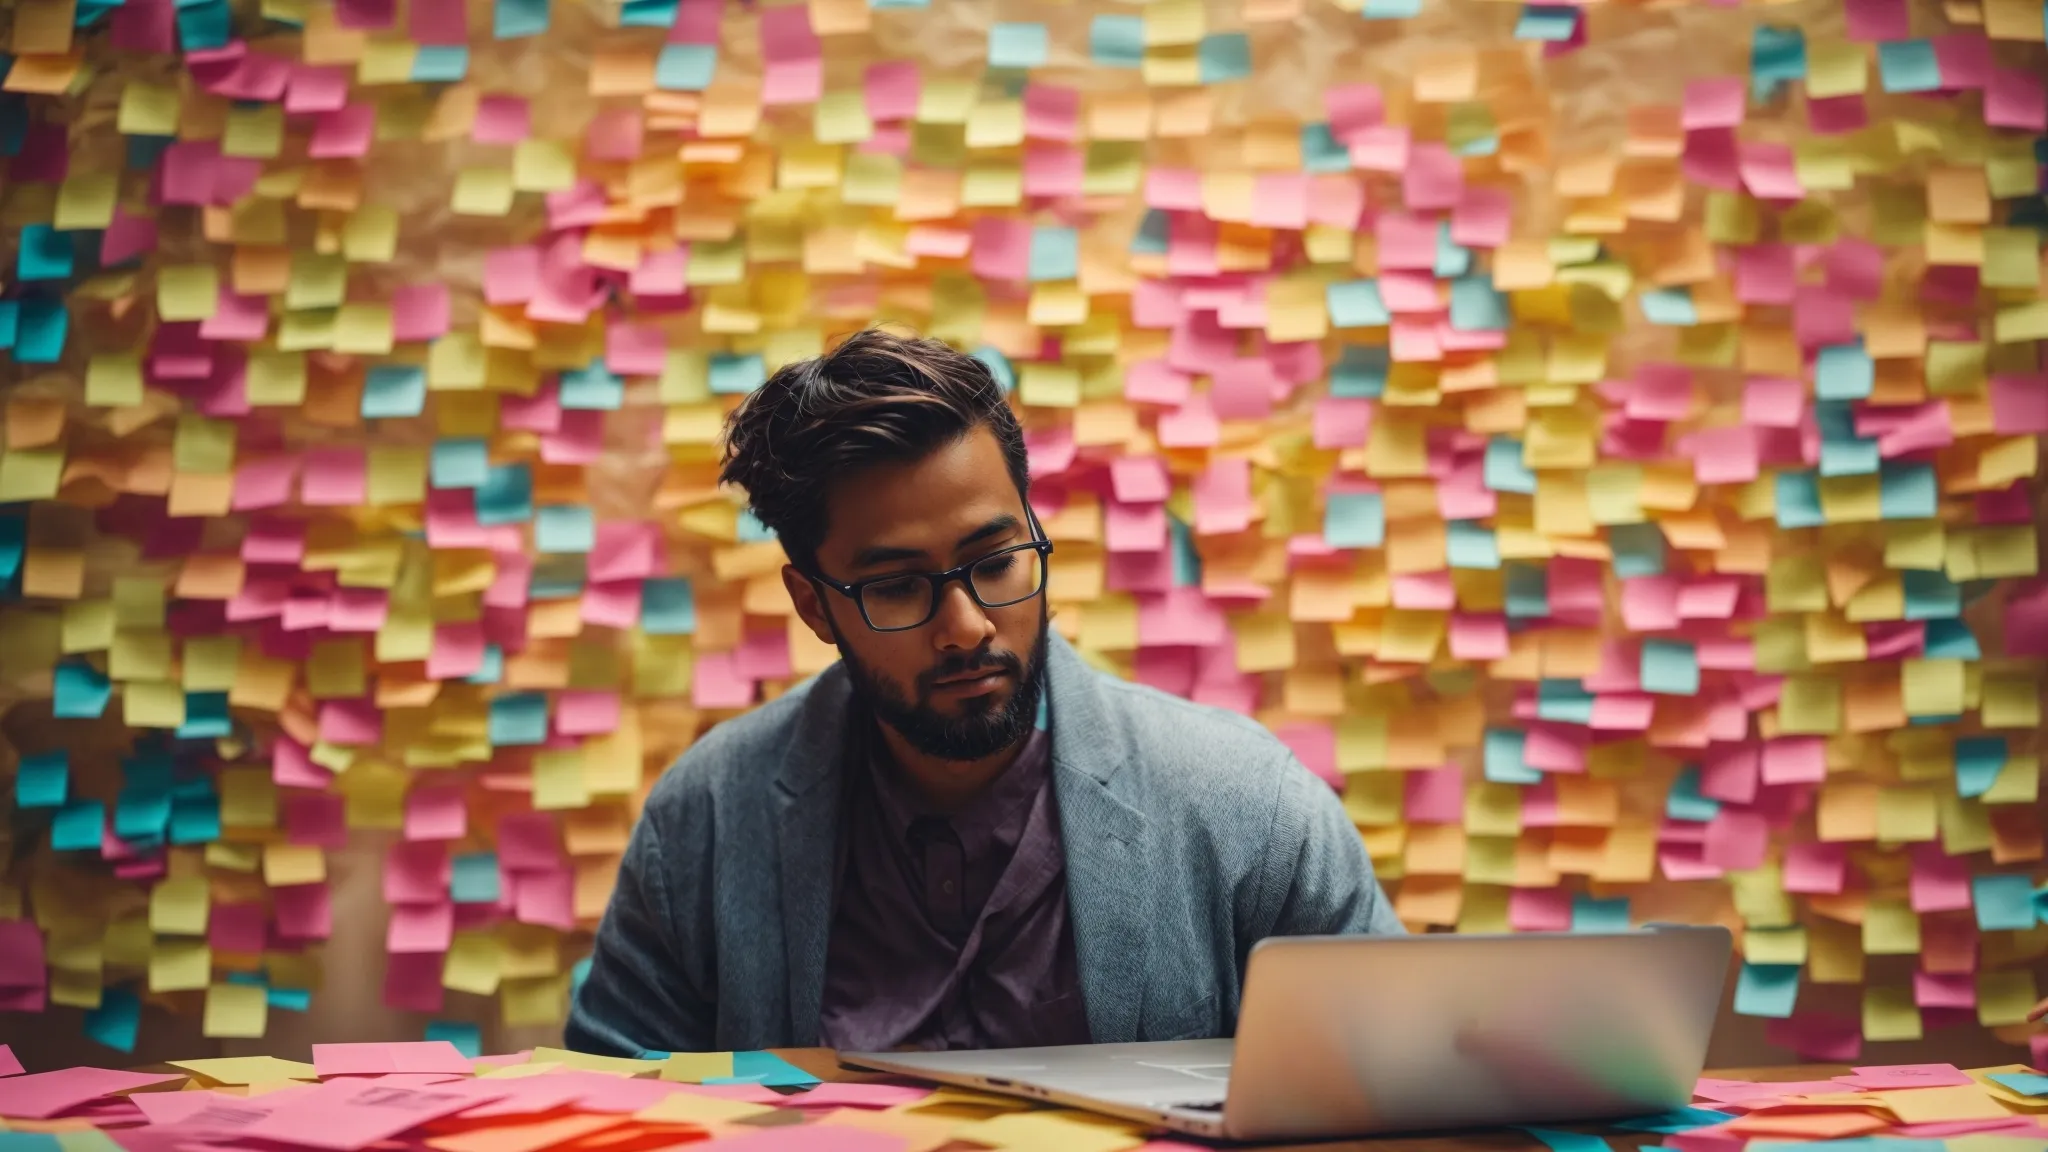 a person surrounded by a myriad of colorful sticky notes with single words or short phrases, sitting in front of a computer with multiple tabs open, each tab displaying a different keyword analysis tool.